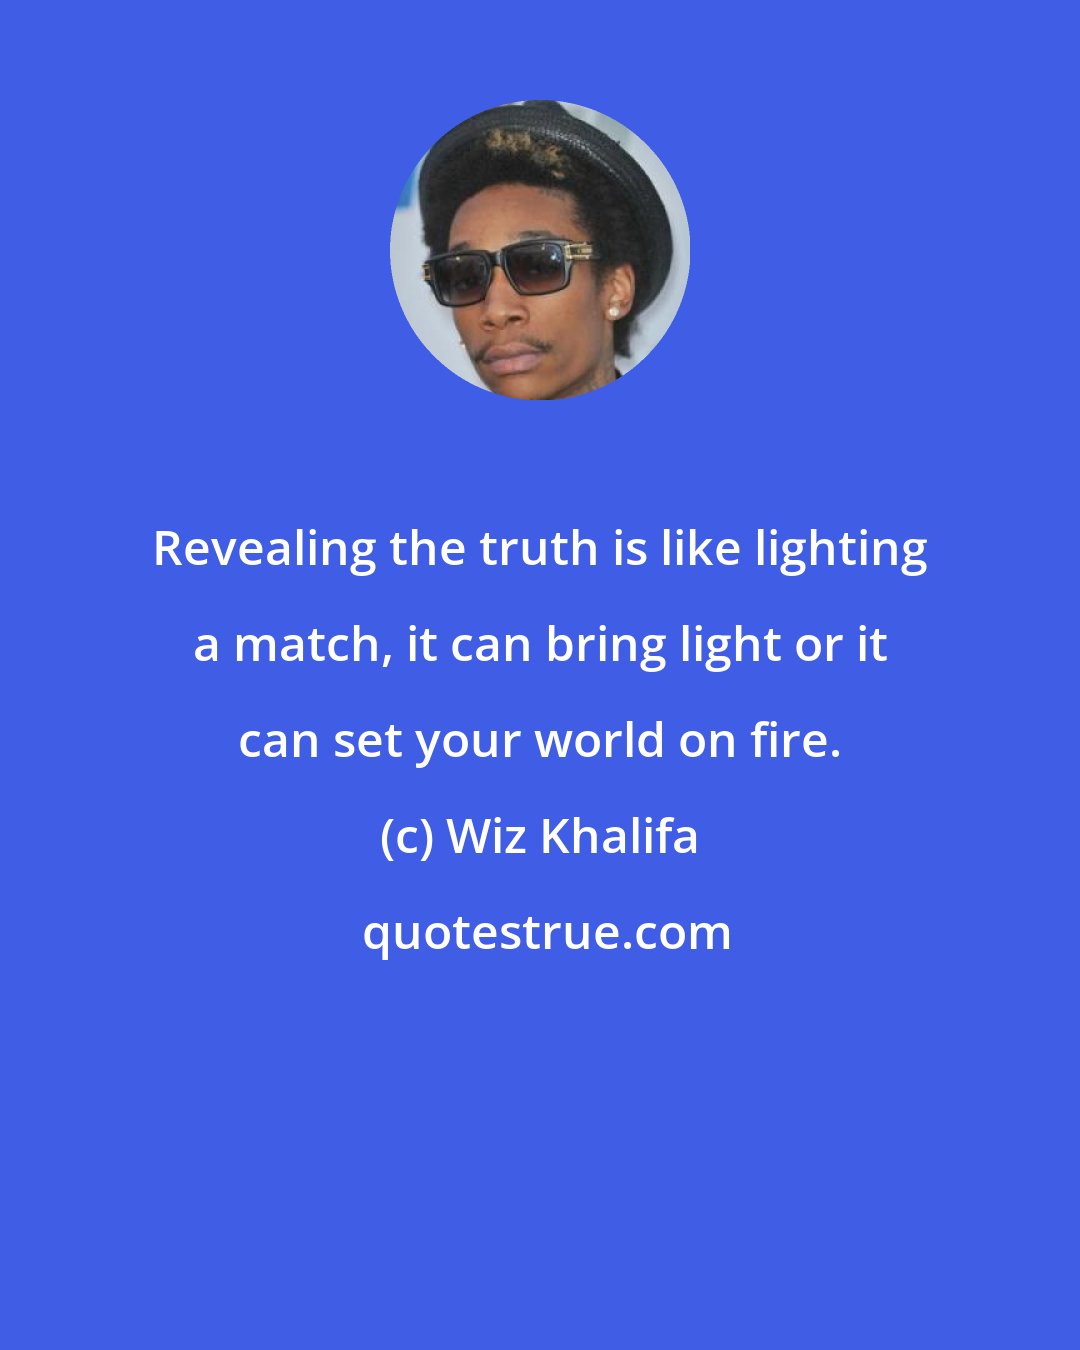 Wiz Khalifa: Revealing the truth is like lighting a match, it can bring light or it can set your world on fire.